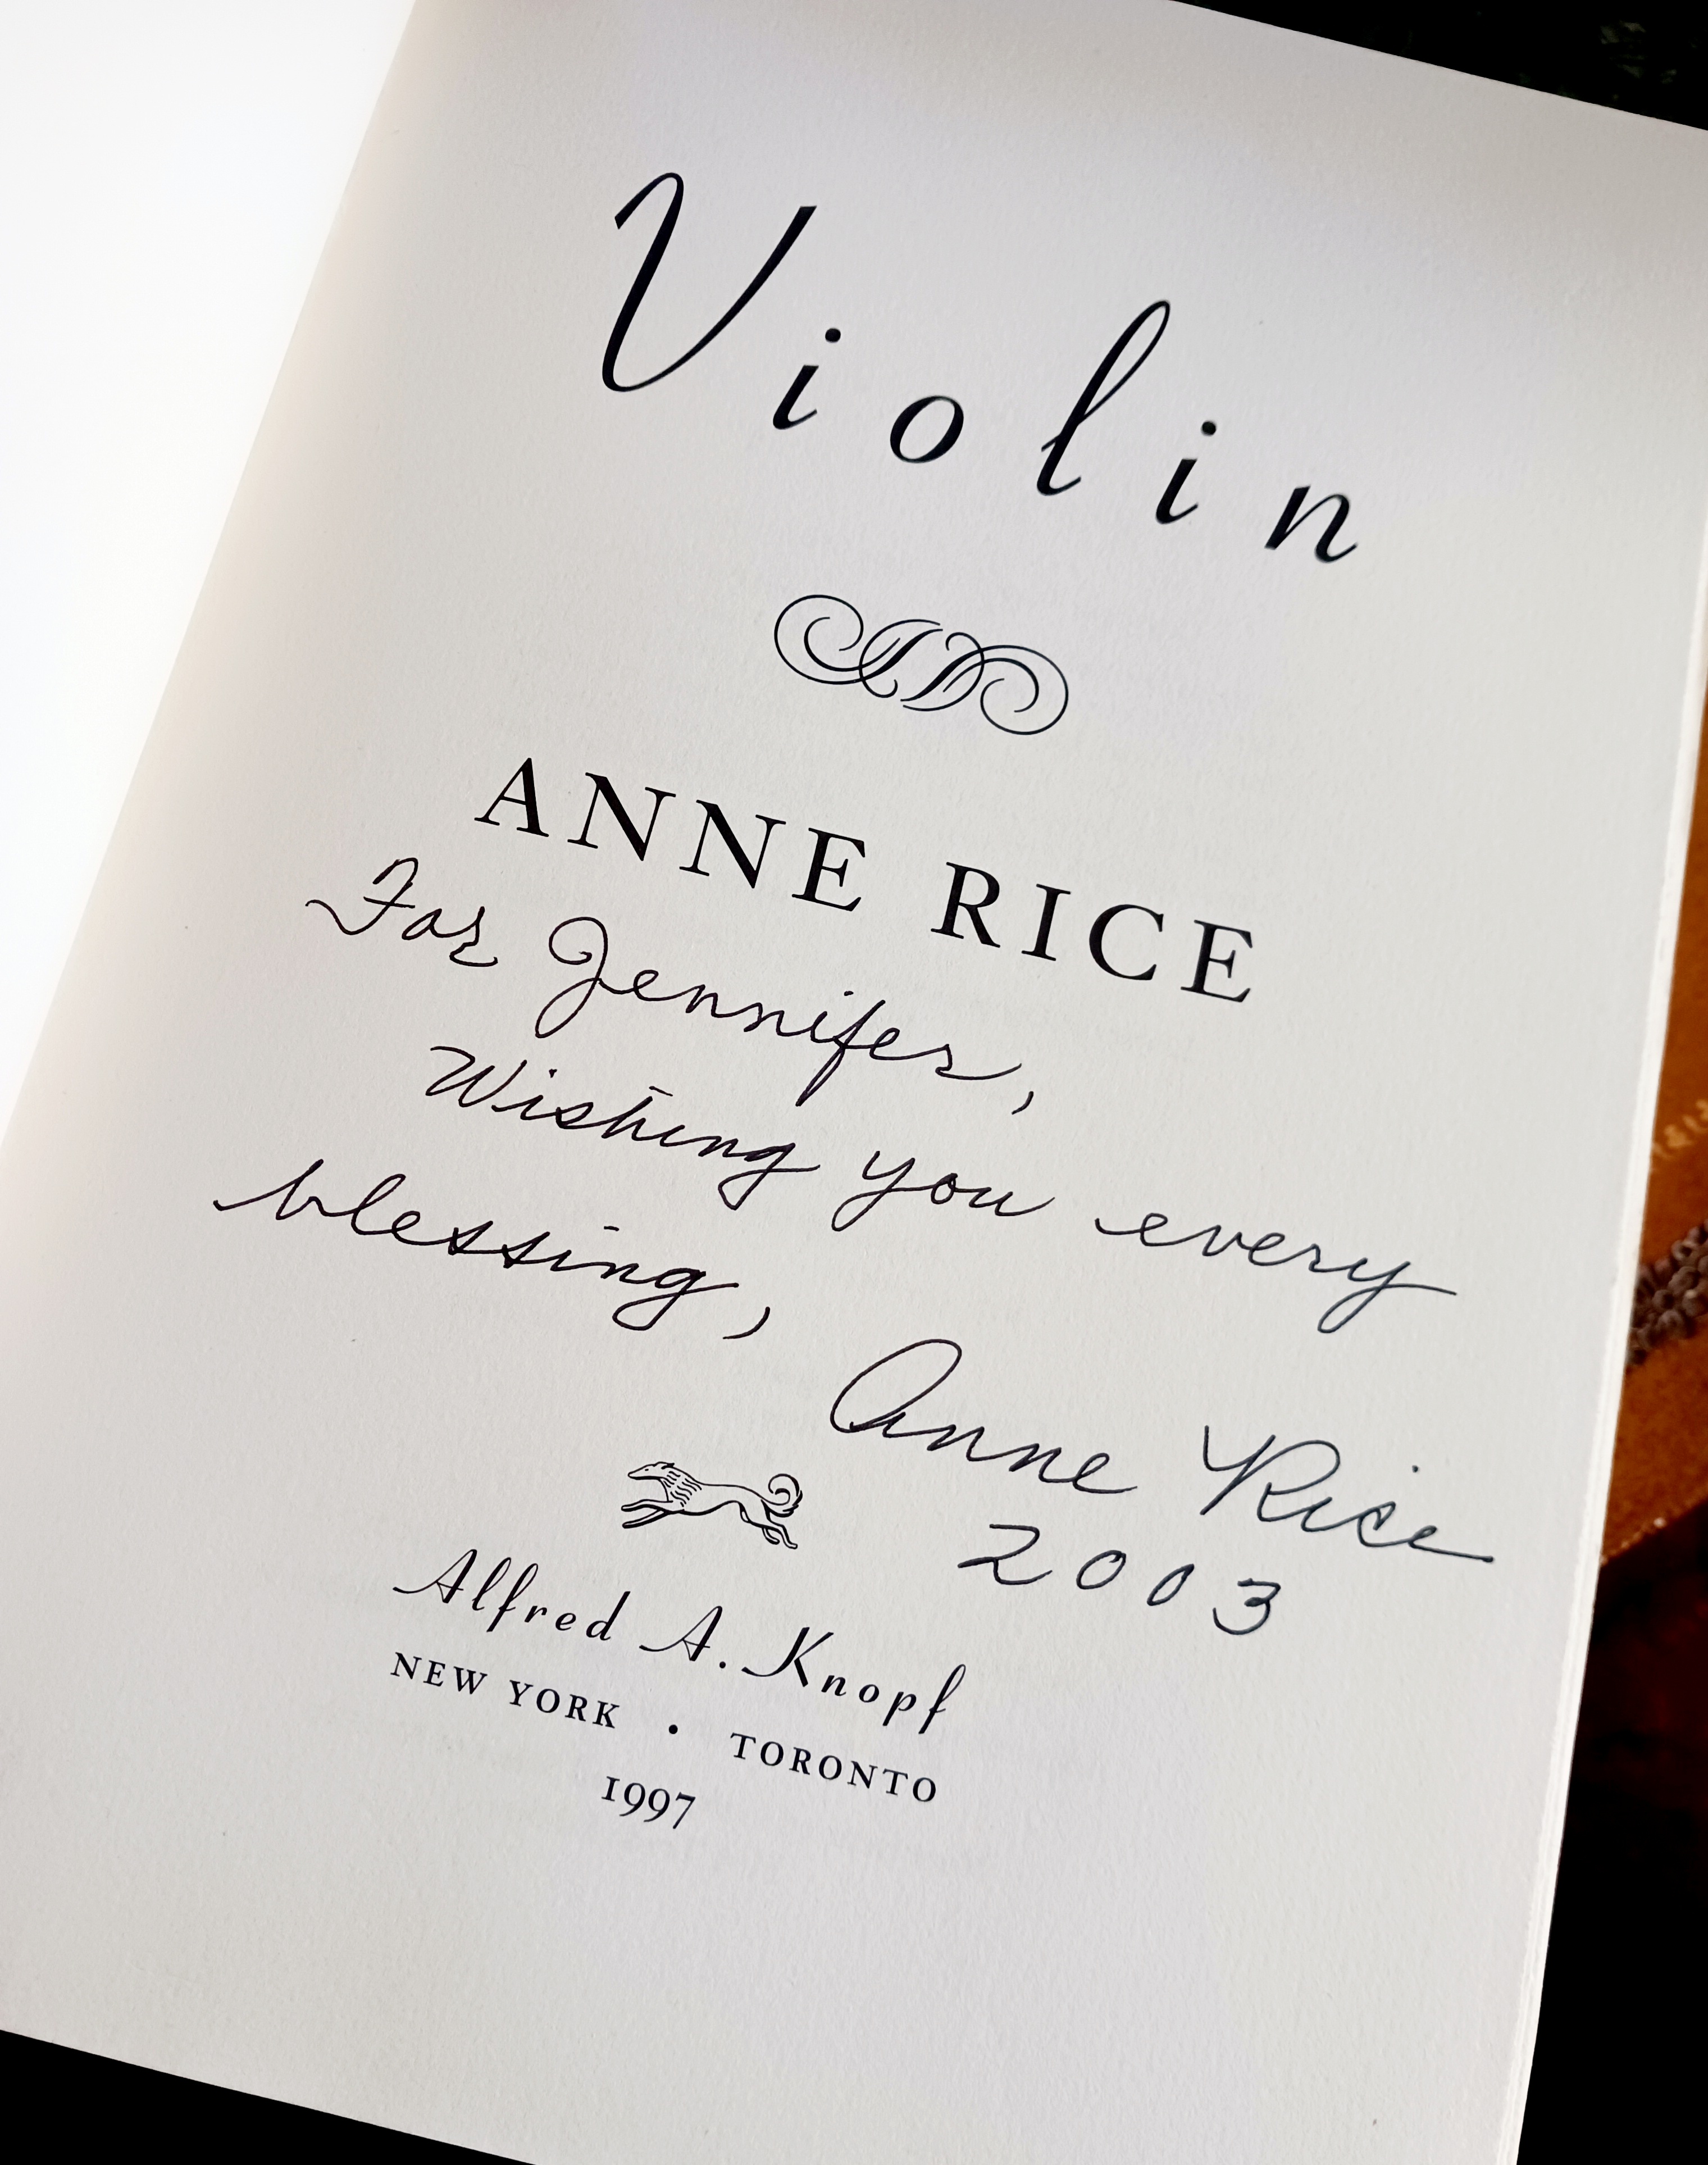 What authors read. Authoress Jennifer Susannah Devore's copy of Violin, signed in 2003 by Anne Rice, from her First Street home in the Garden District of New Orleans, Louisiana. Photo: JSDevore